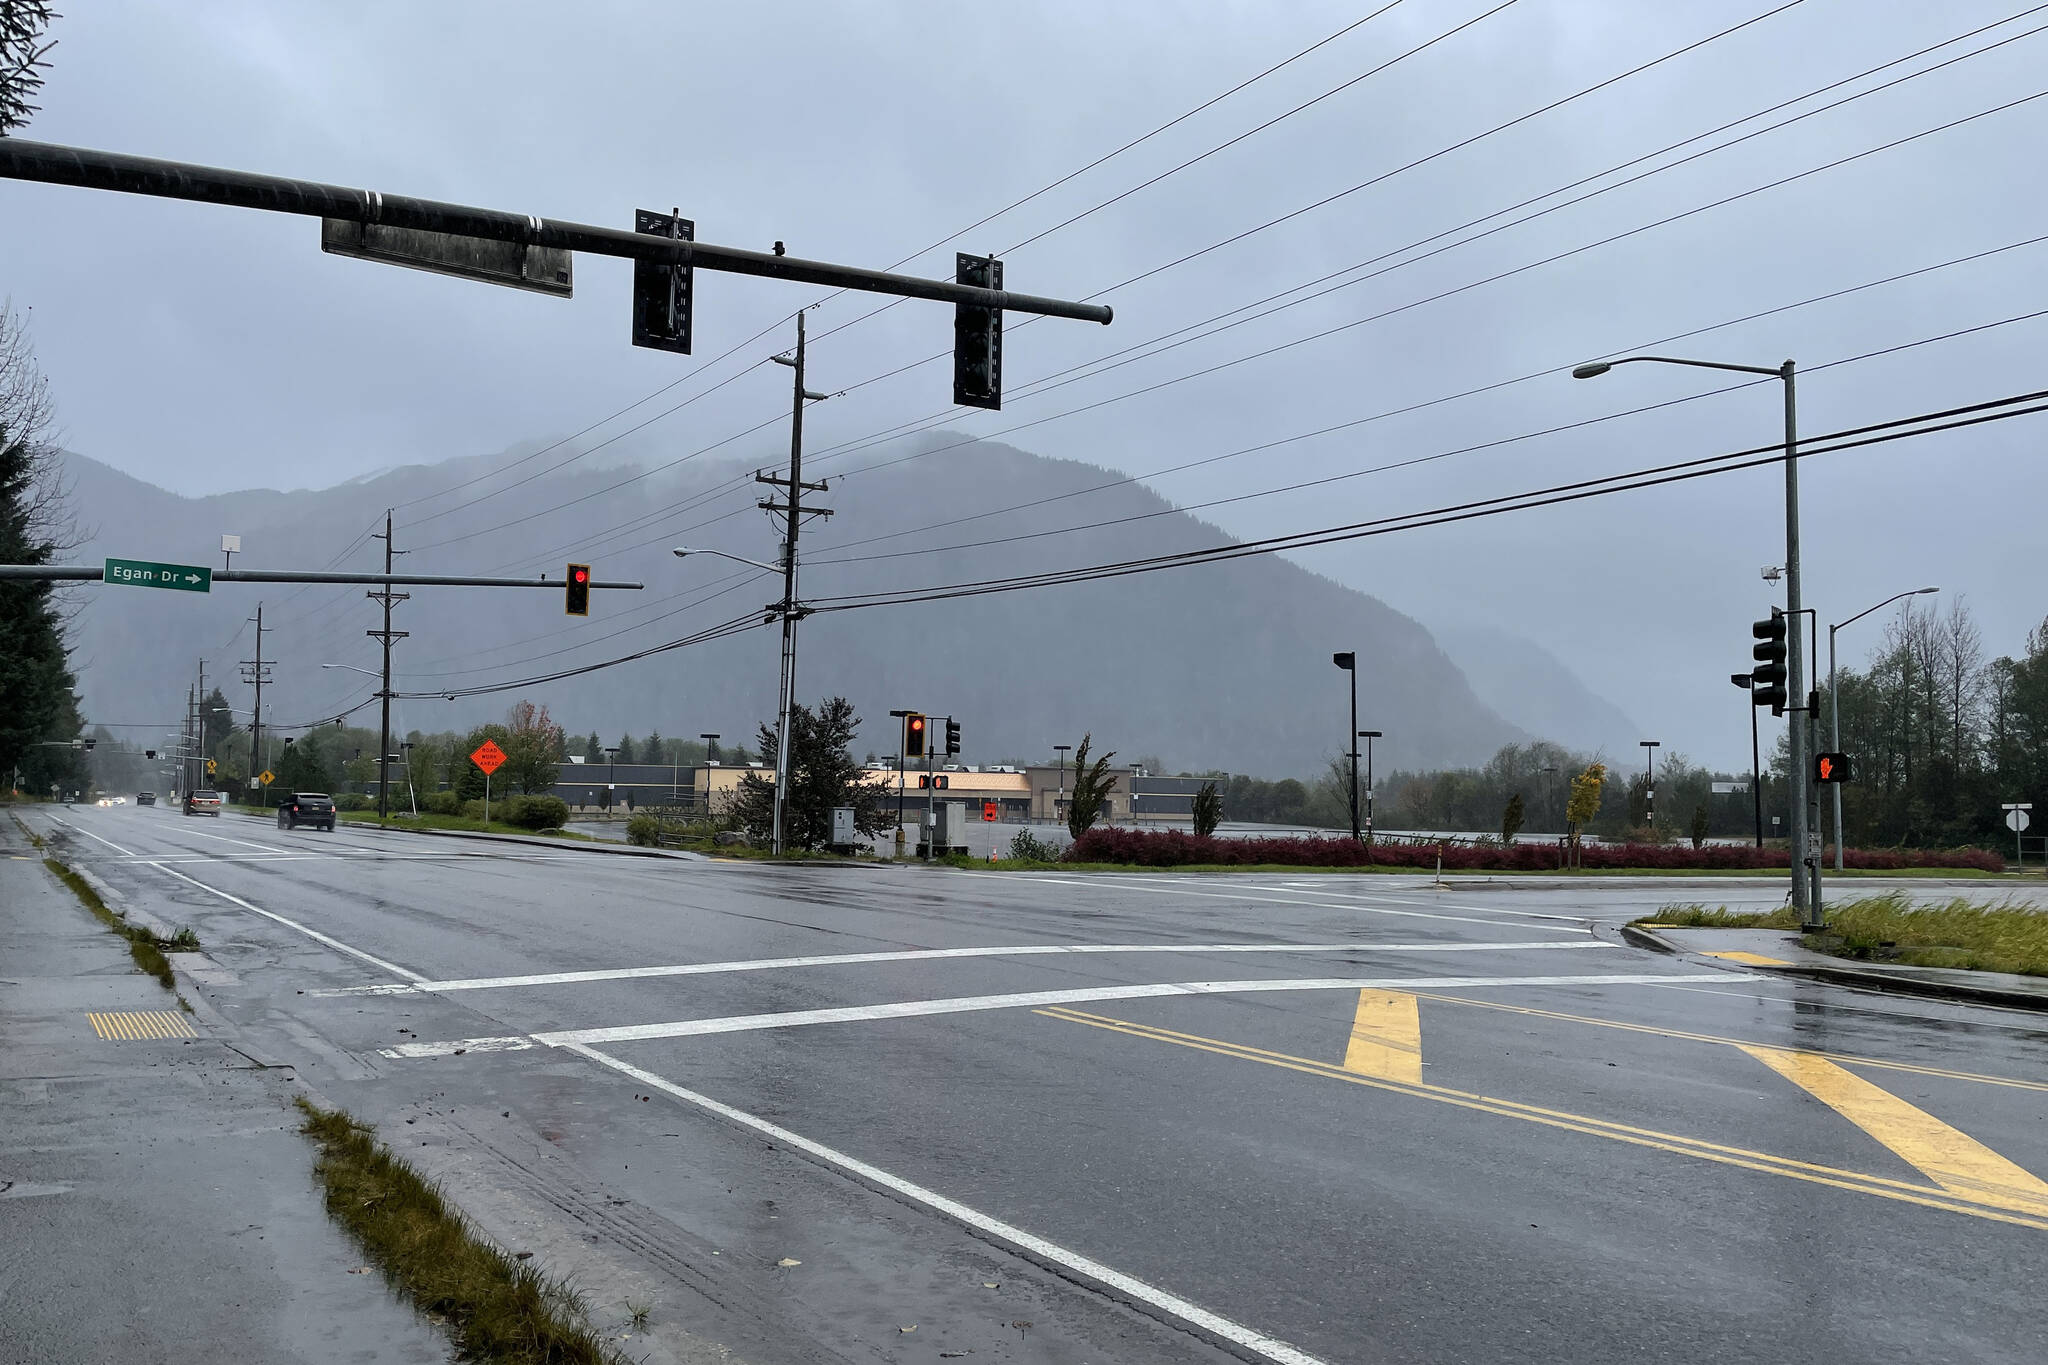 A woman died of injuries sustained after being struck by a car on Glacier Highway near the old Walmart on Sept. 30, 2021, said a police spokesperson in a news release. (Michael S. Lockett / Juneau Empire)